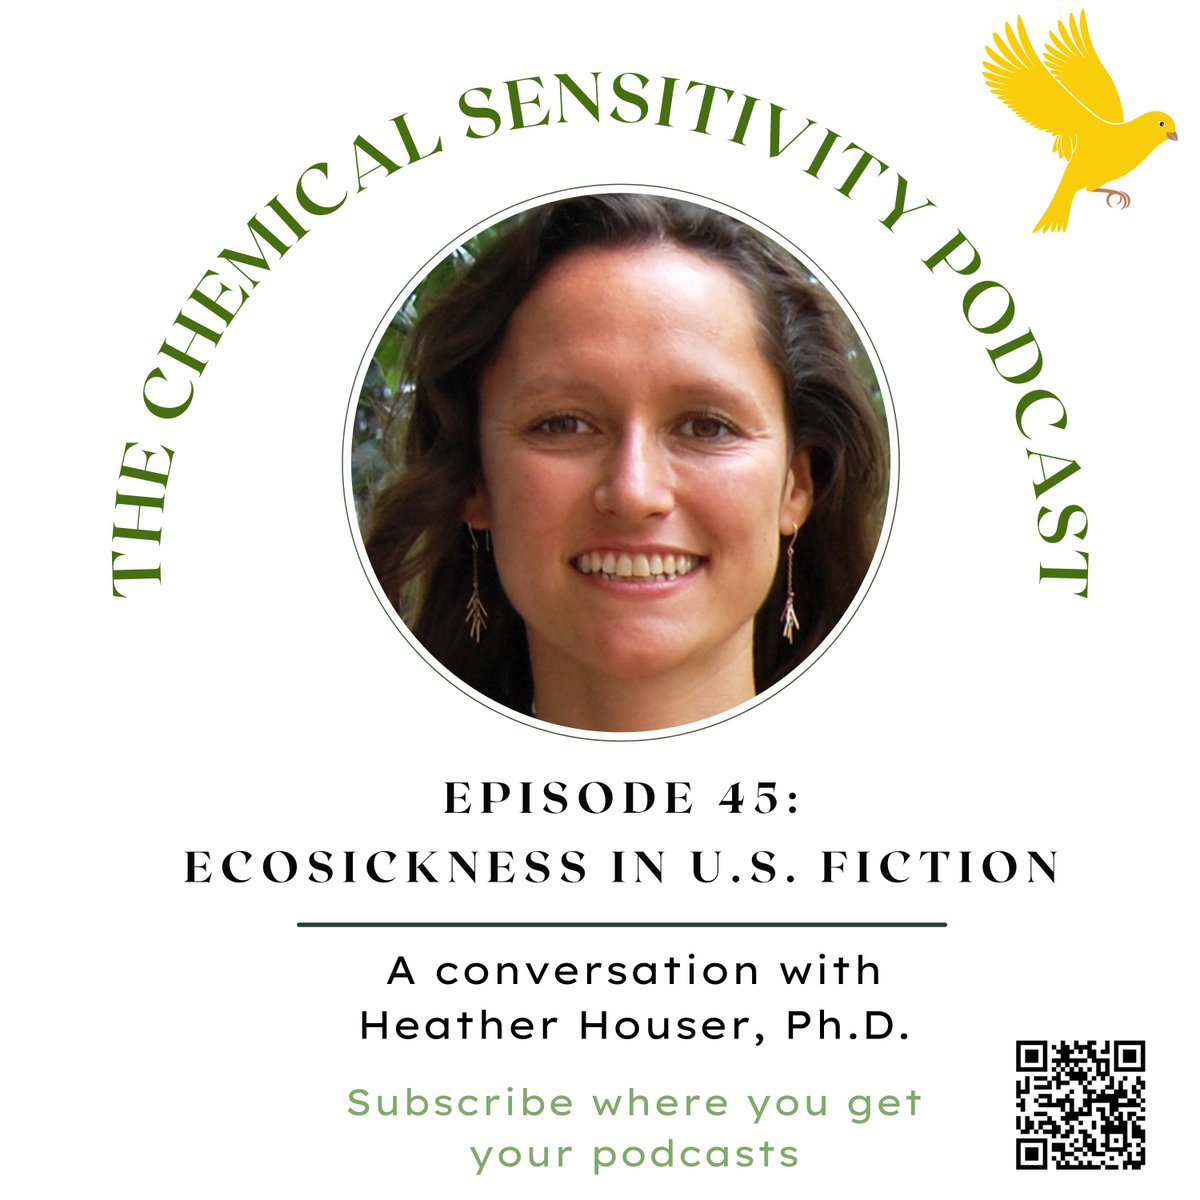 Episode 45 of The Chemical Sensitivity Podcast is available now!  chemicalsensitivitypodcast.org

I’m speaking with @HouserHeather,  professor of English at the University of Texas at Austin and the author of the 2014 book, “Ecosickness in Contemporary U.S. Fiction.”

#MCS #TILT #CI